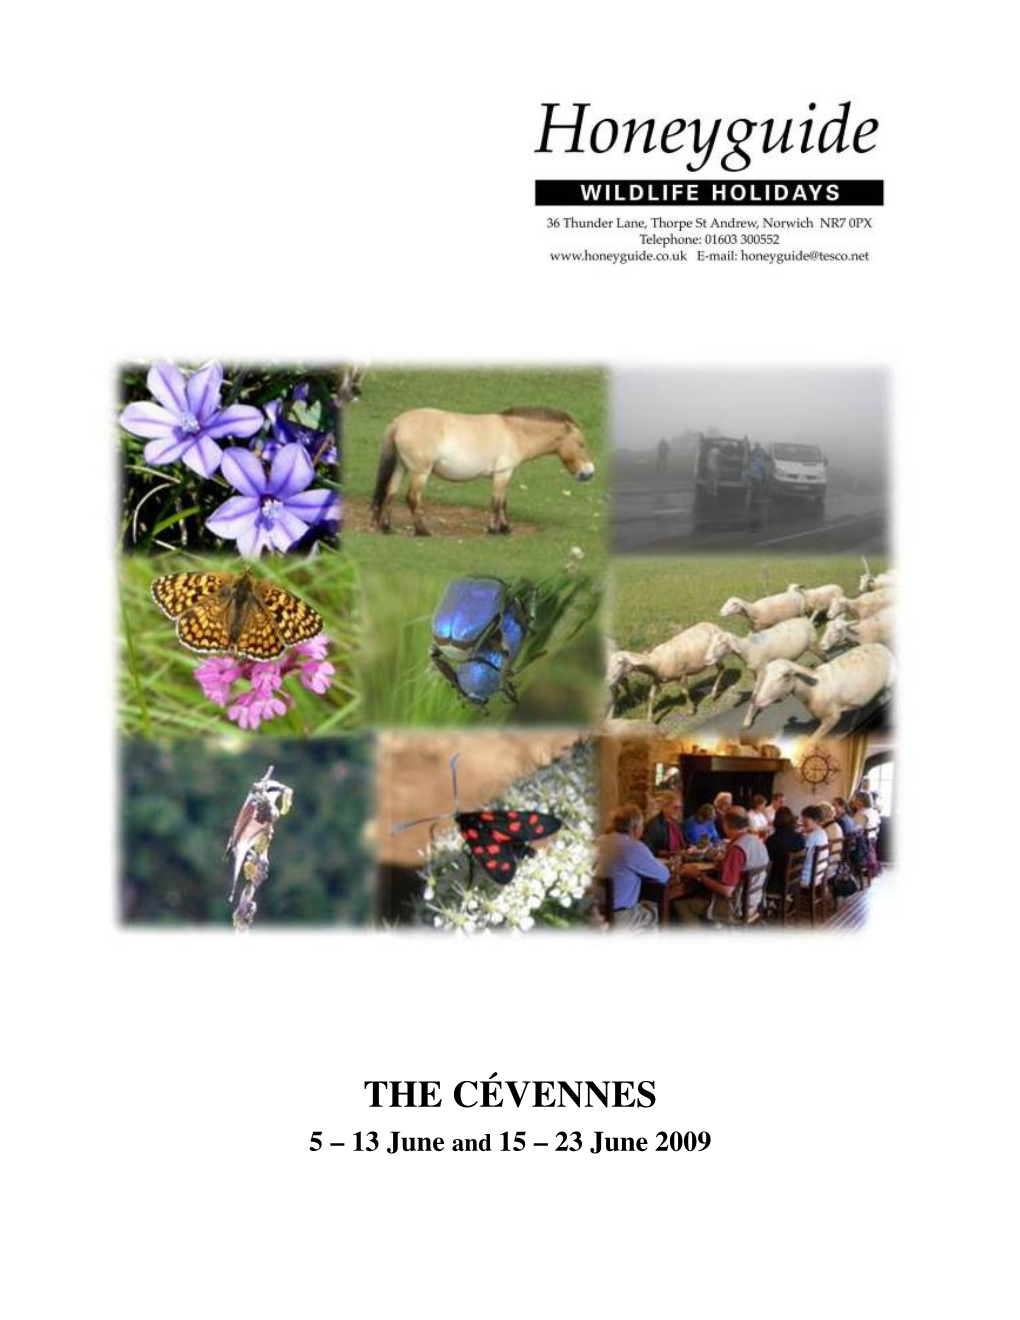 THE CÉVENNES 5 – 13 June and 15 – 23 June 2009